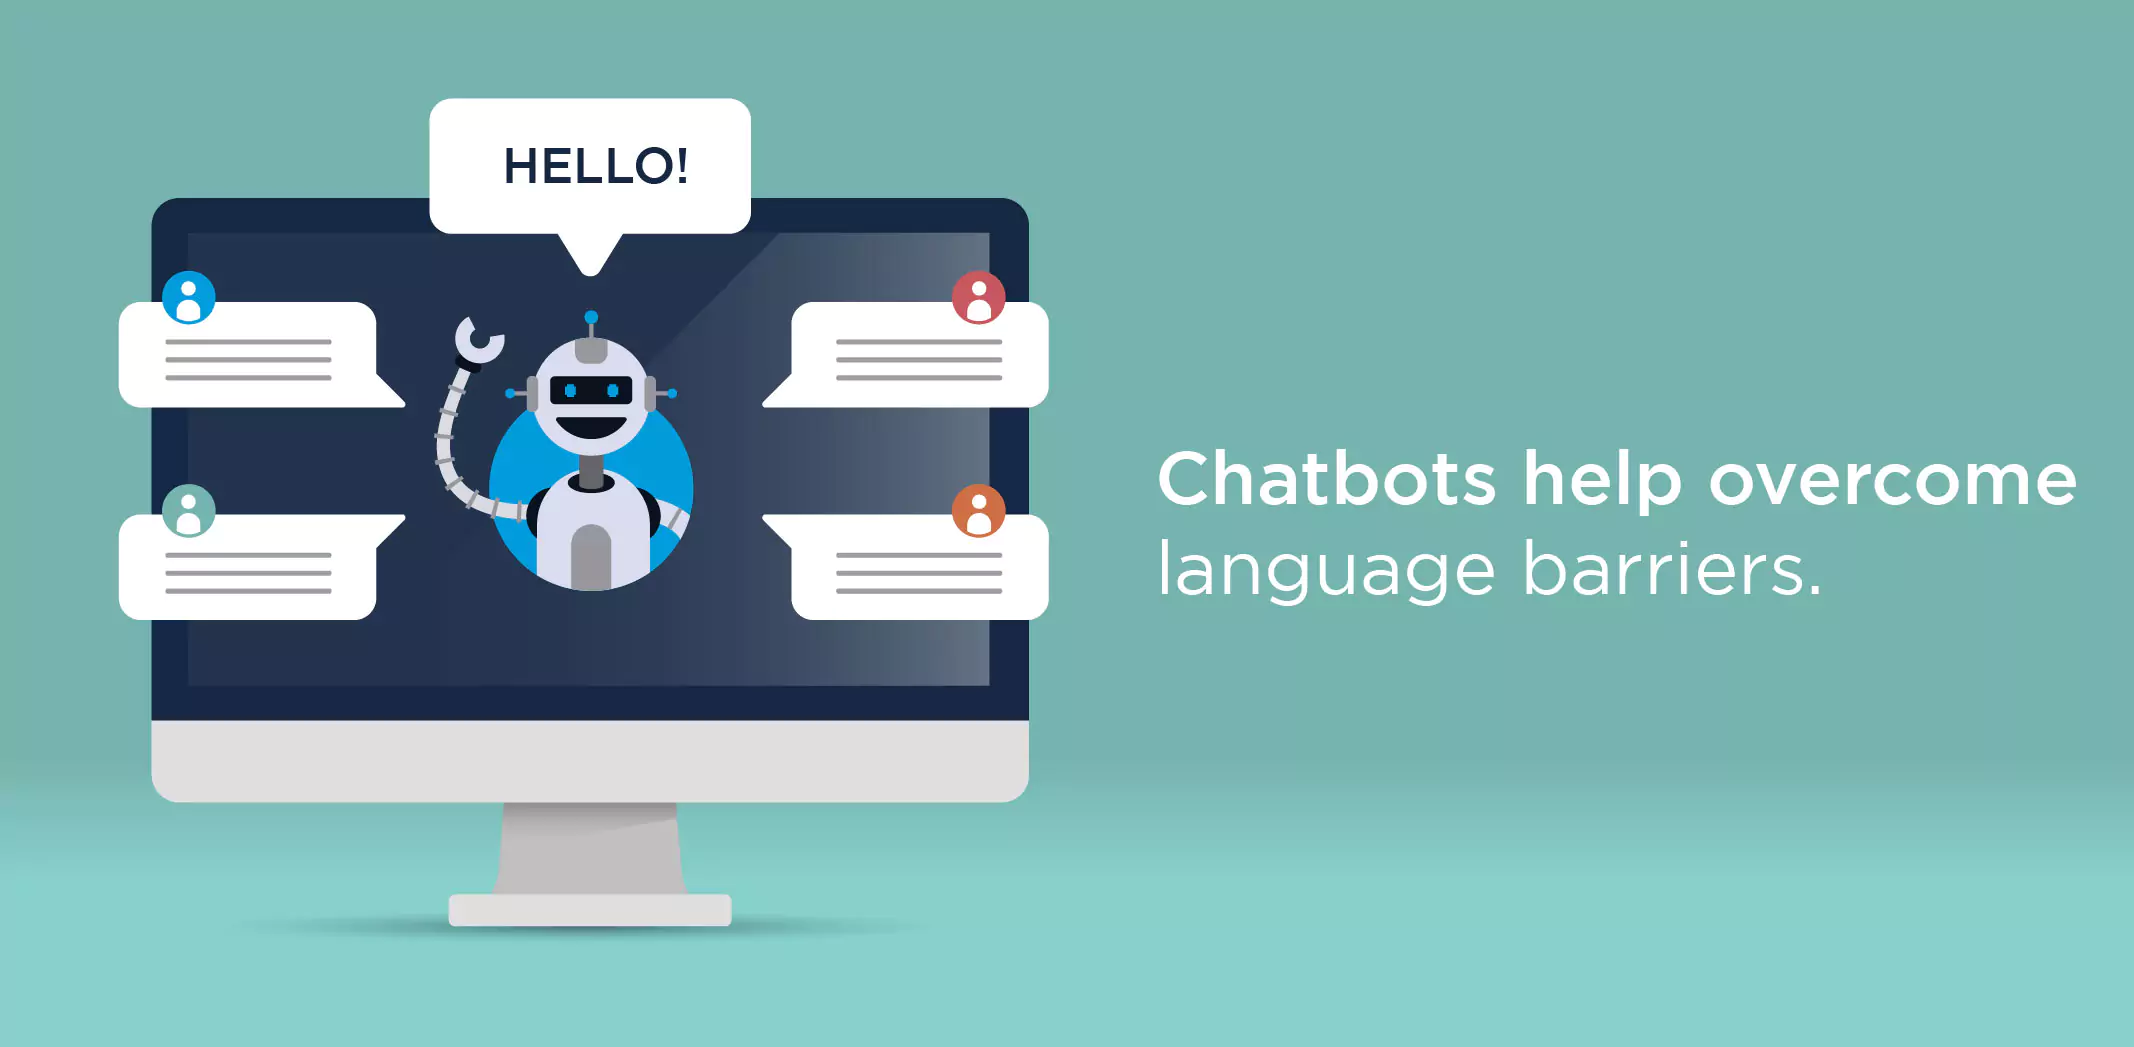 Chatbots help overcome language barriers.